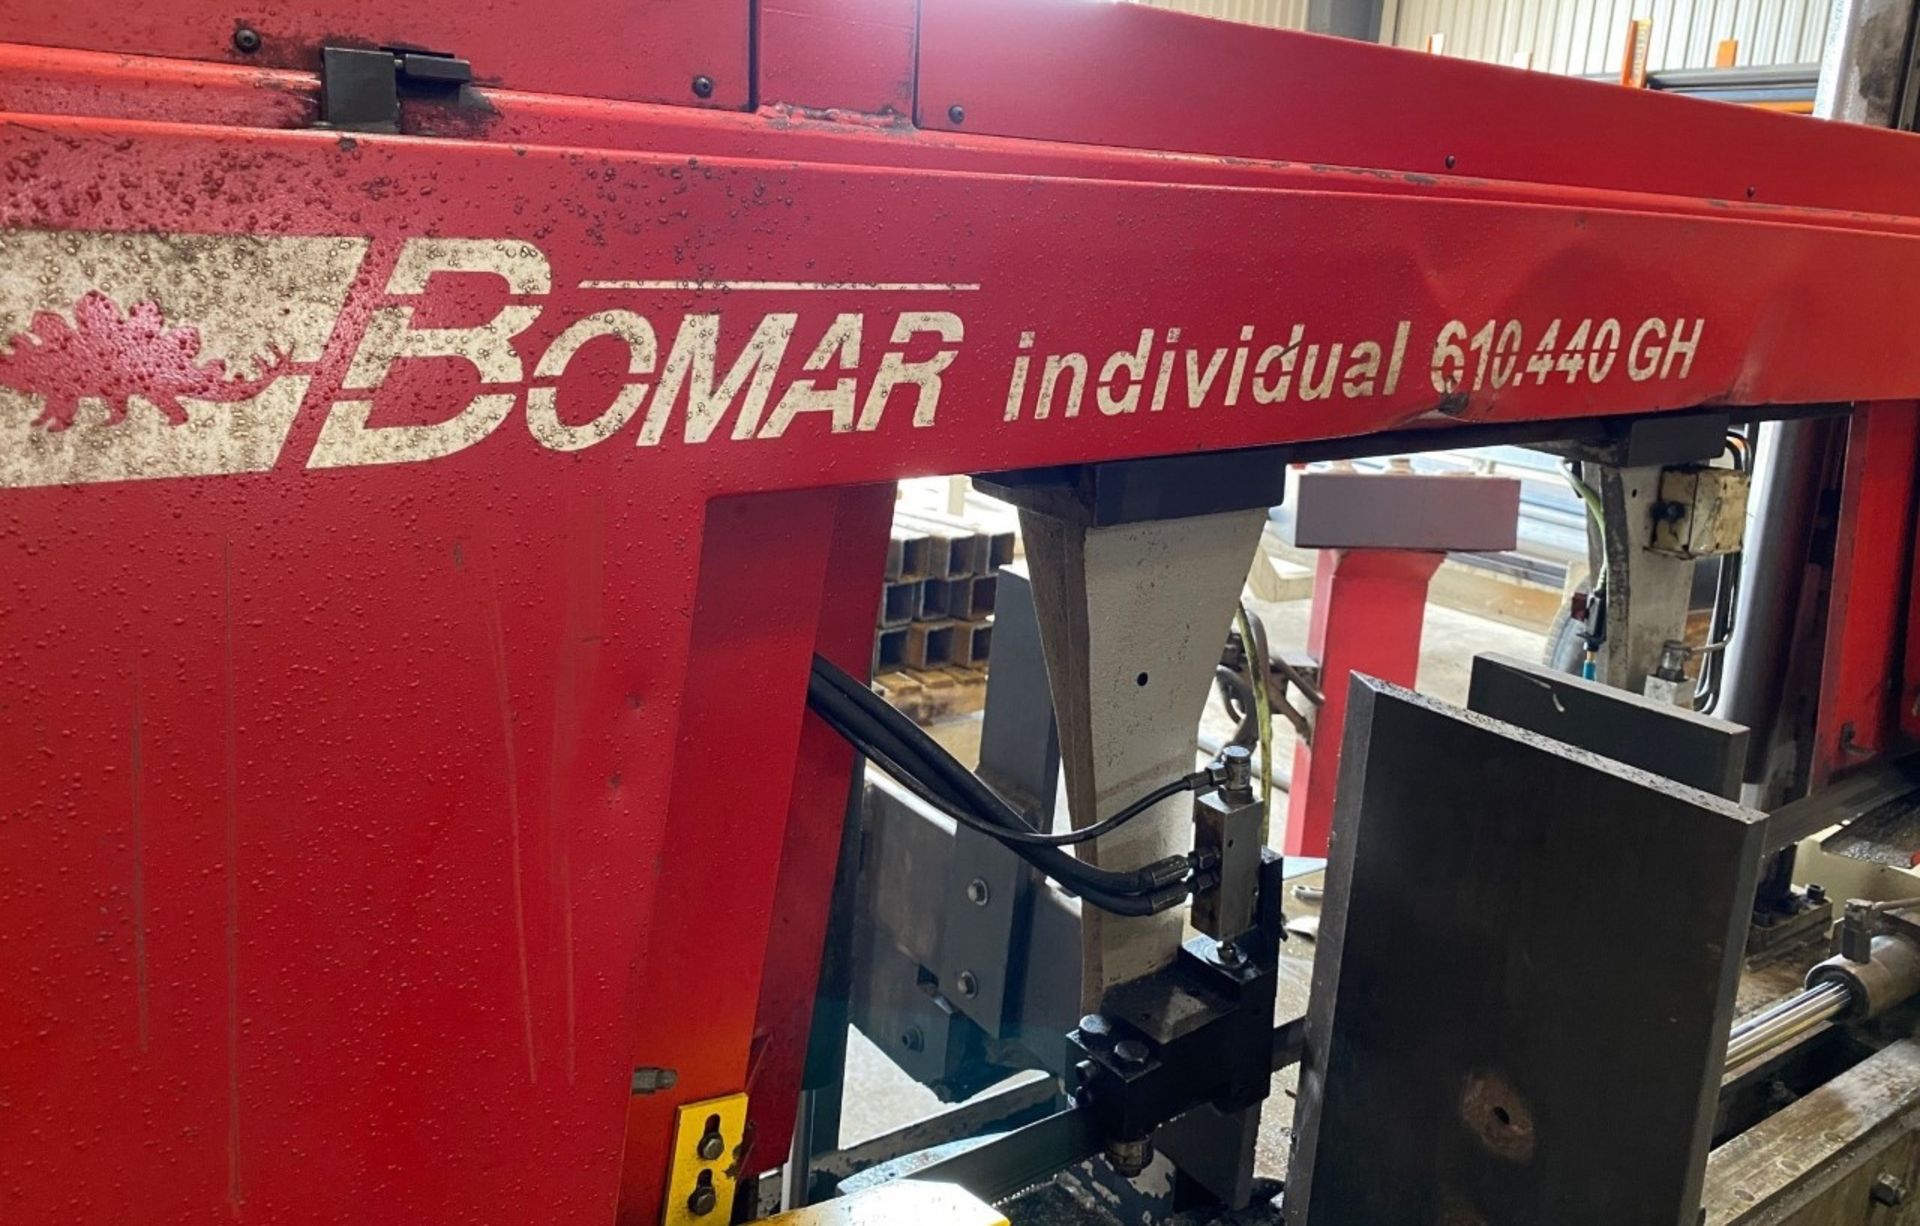 BOMAR (2008) 610.440 GH HORIZONTAL BAND SAW WITH 47"X125"X90" CUTTING CAPACITY, HYDRAULIC VISE, 251" - Image 2 of 4